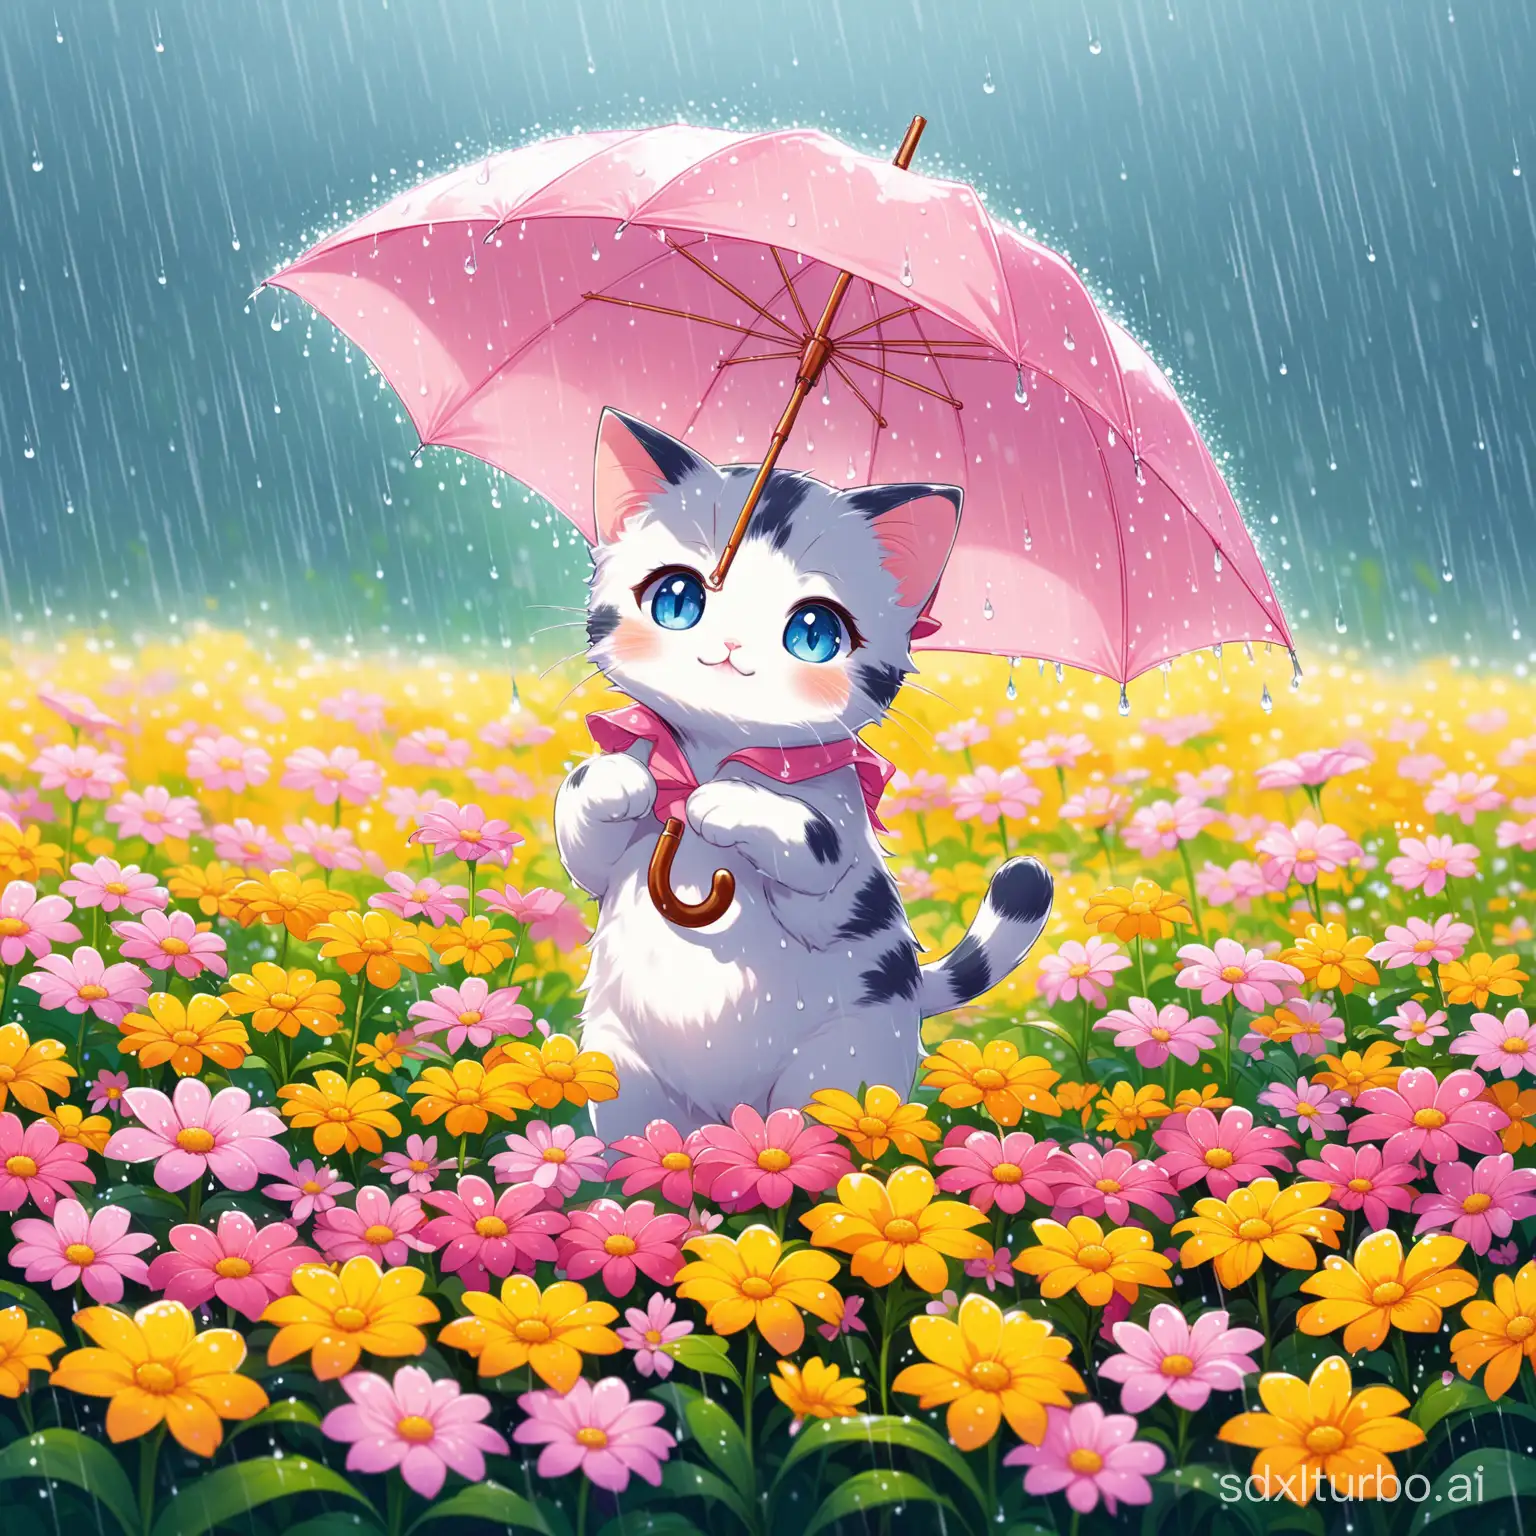 The little cat, holding an umbrella, stood in a sea of flowers on a rainy day.